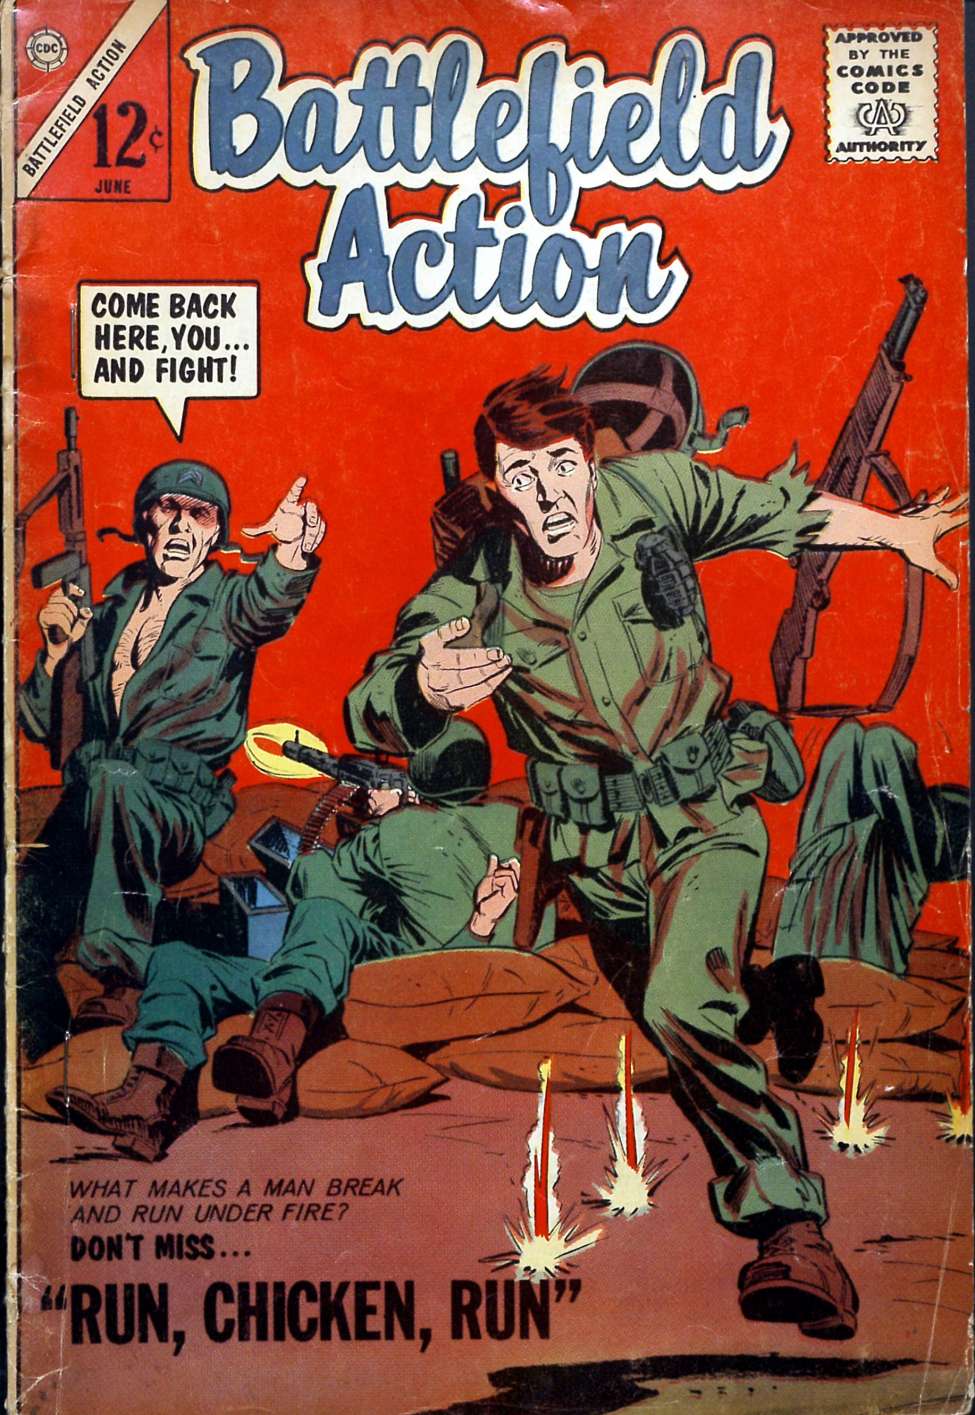 Book Cover For Battlefield Action 53